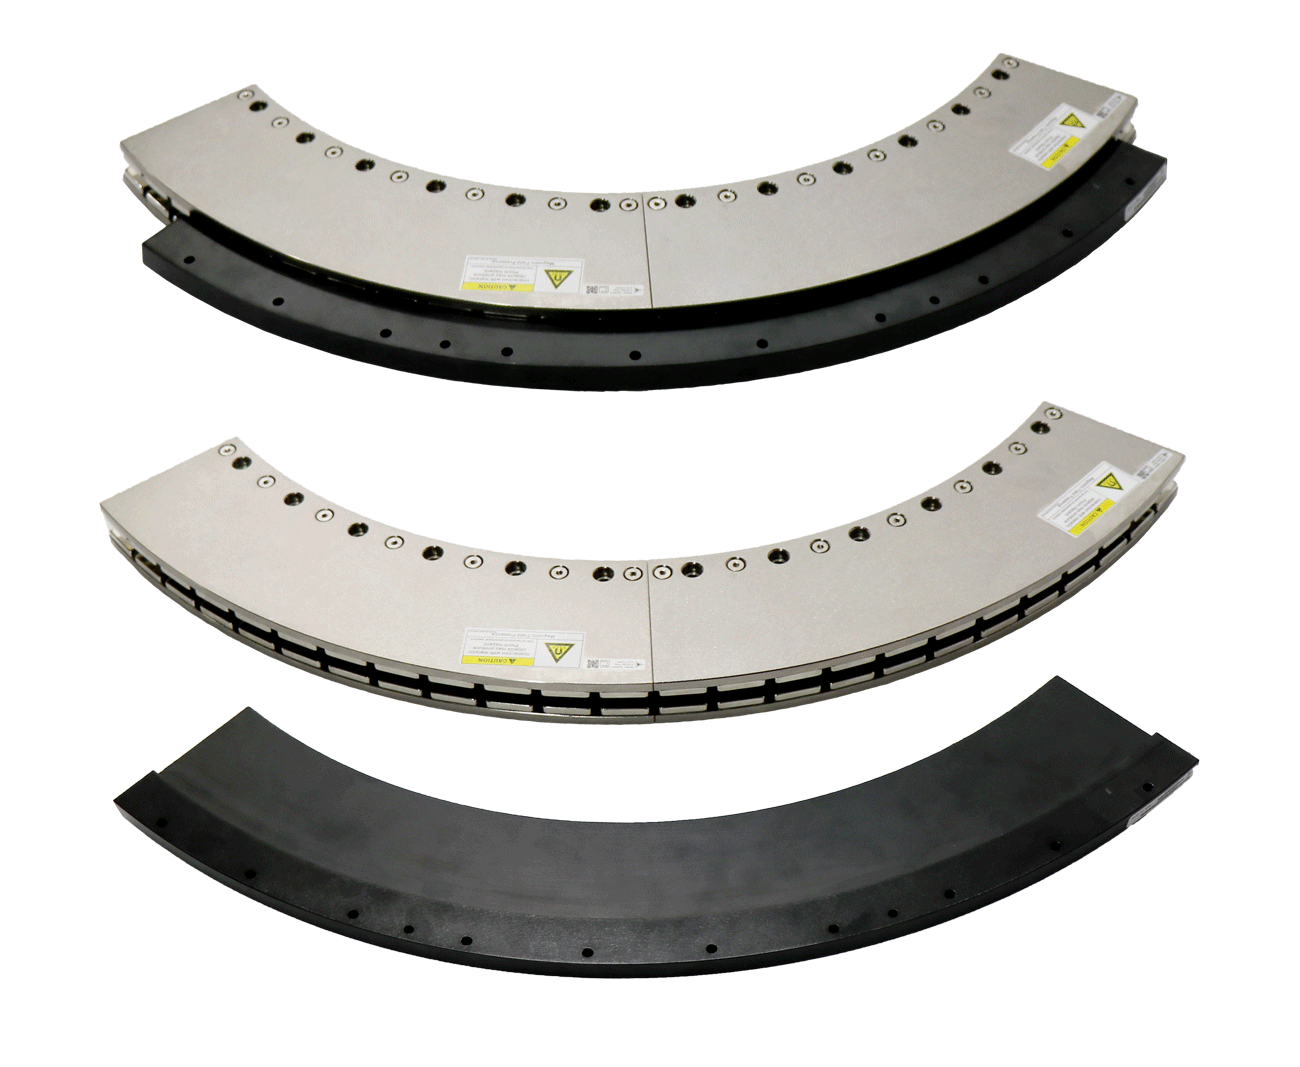 Linear motors of the ACR series